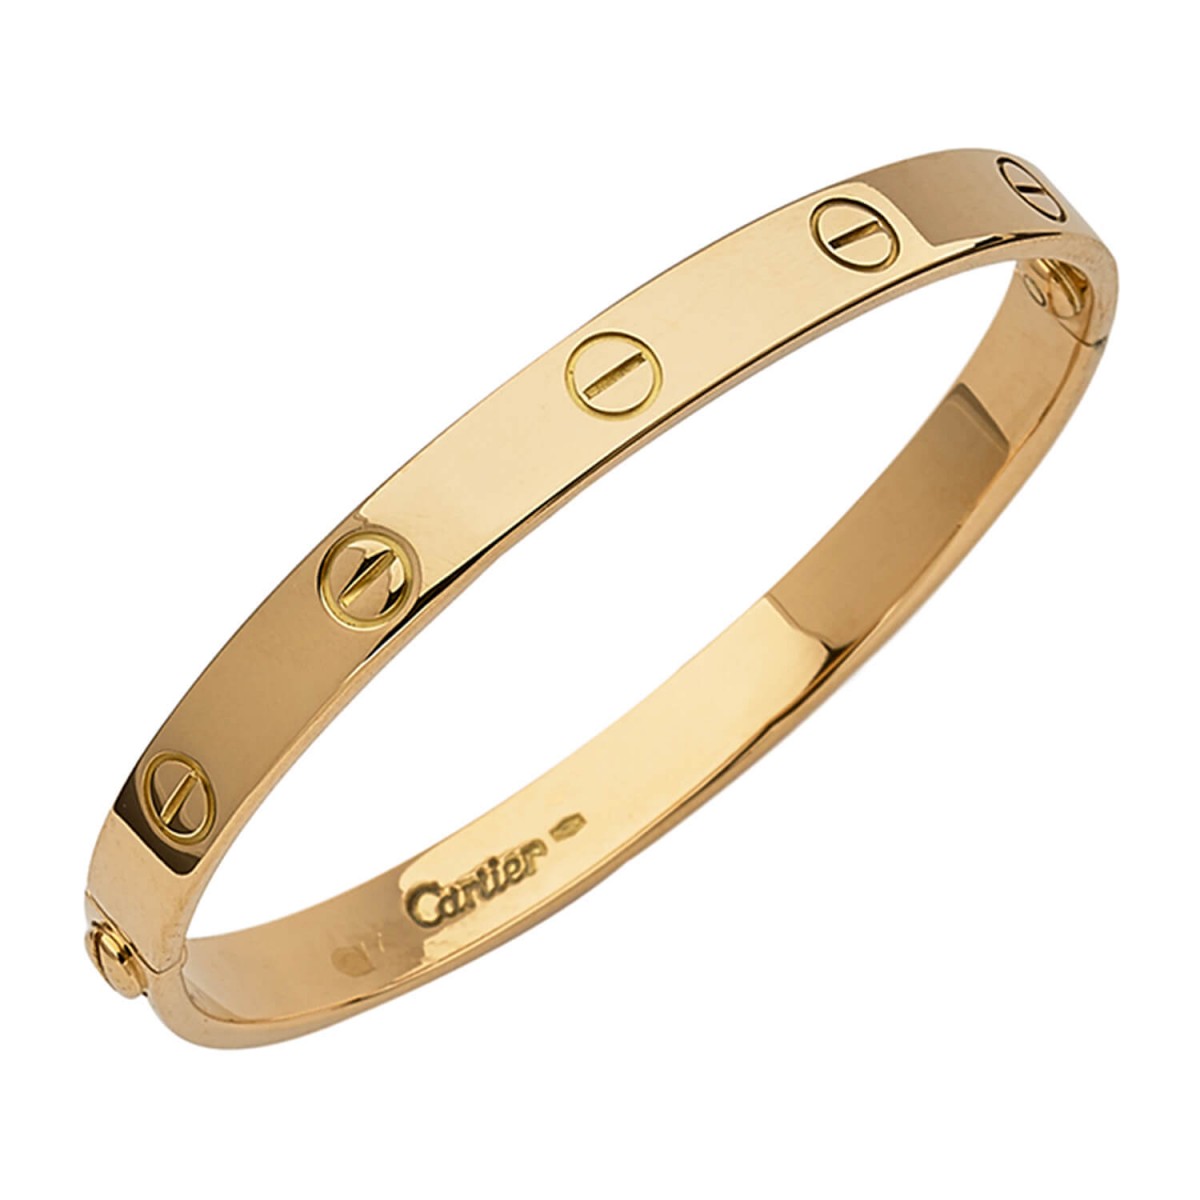 The iconic Cartier Love bracelet gets refreshed | Tatler Asia